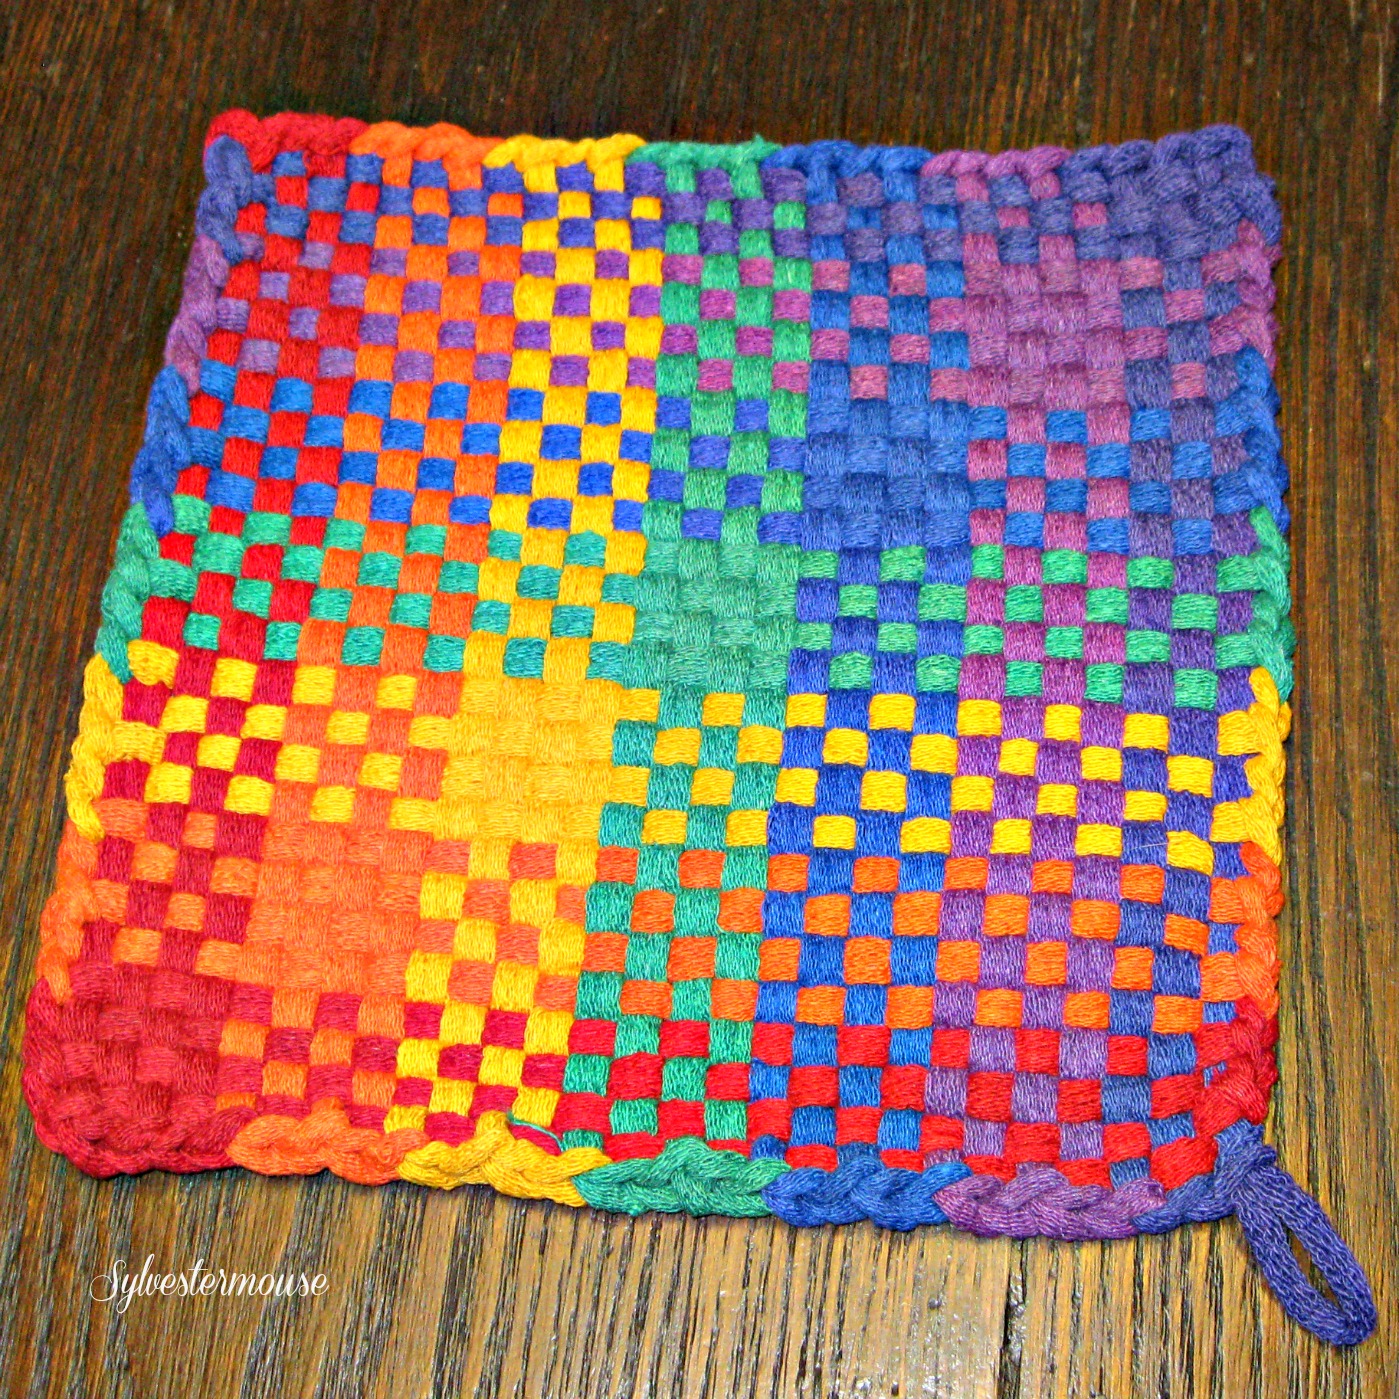 Potholder Pro Looms: How to Make Large Potholders - Crafters Kingdom -  Crafting With Sylvestermouse